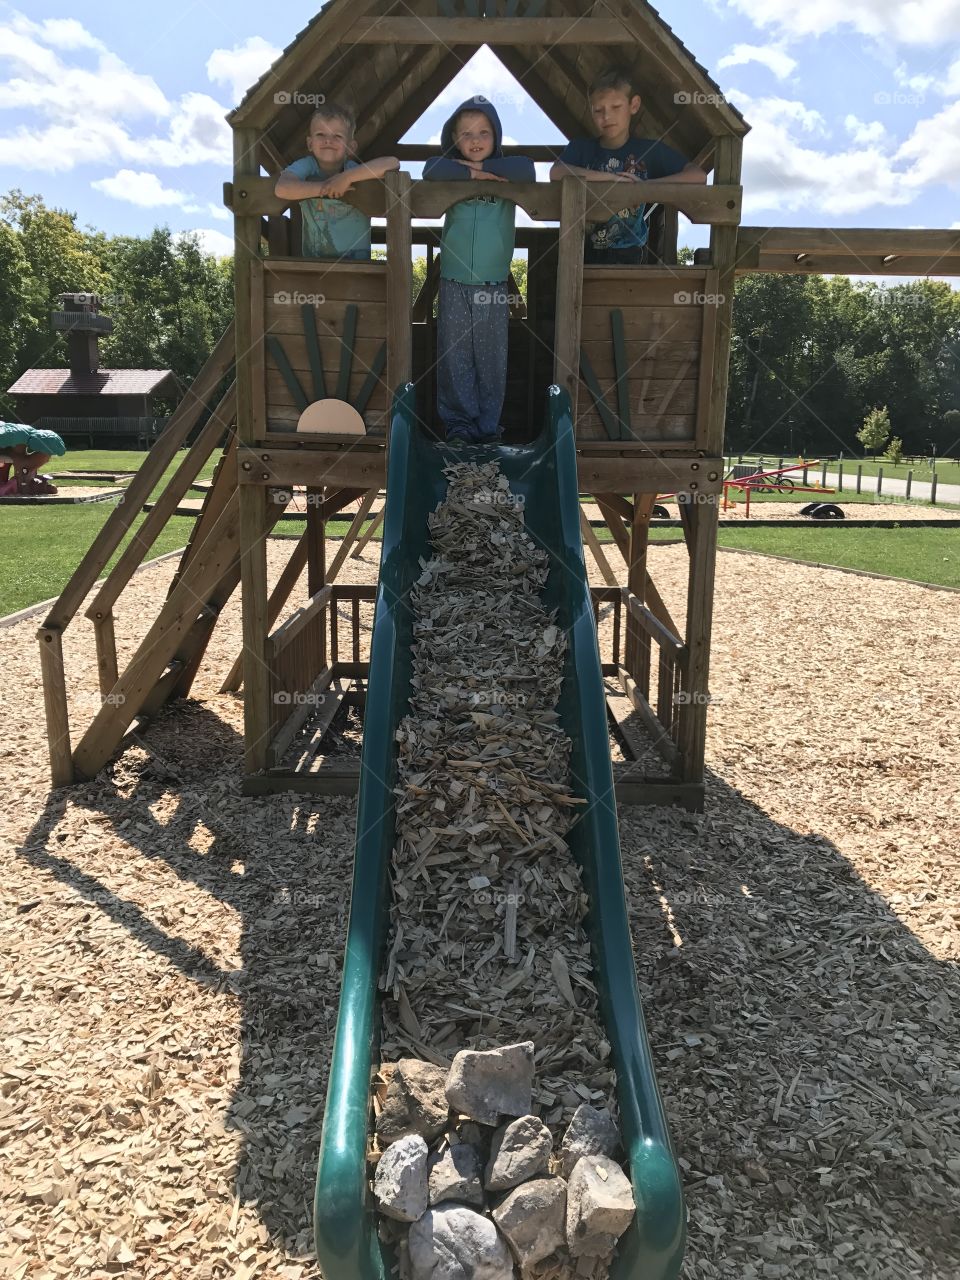 Filling he slide with wood chips